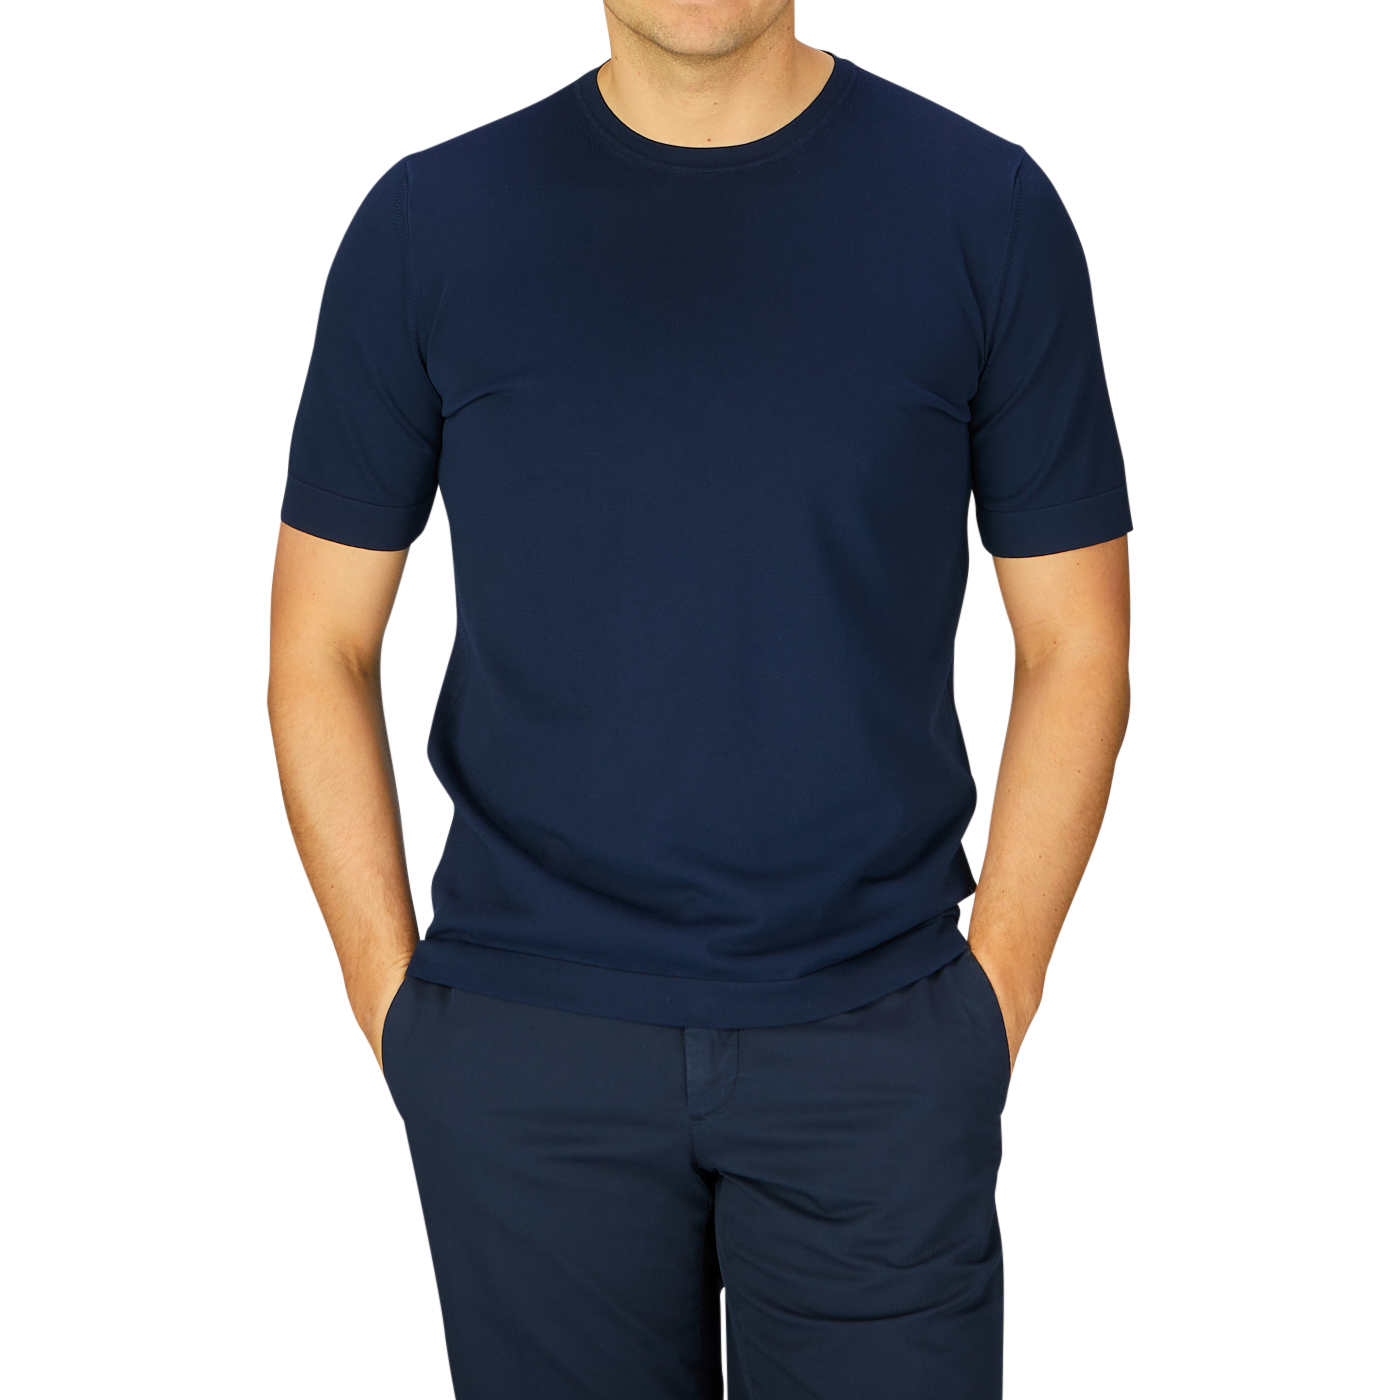 Man wearing a Gran Sasso navy blue organic cotton knitted t-shirt and matching pants standing against a grey background.